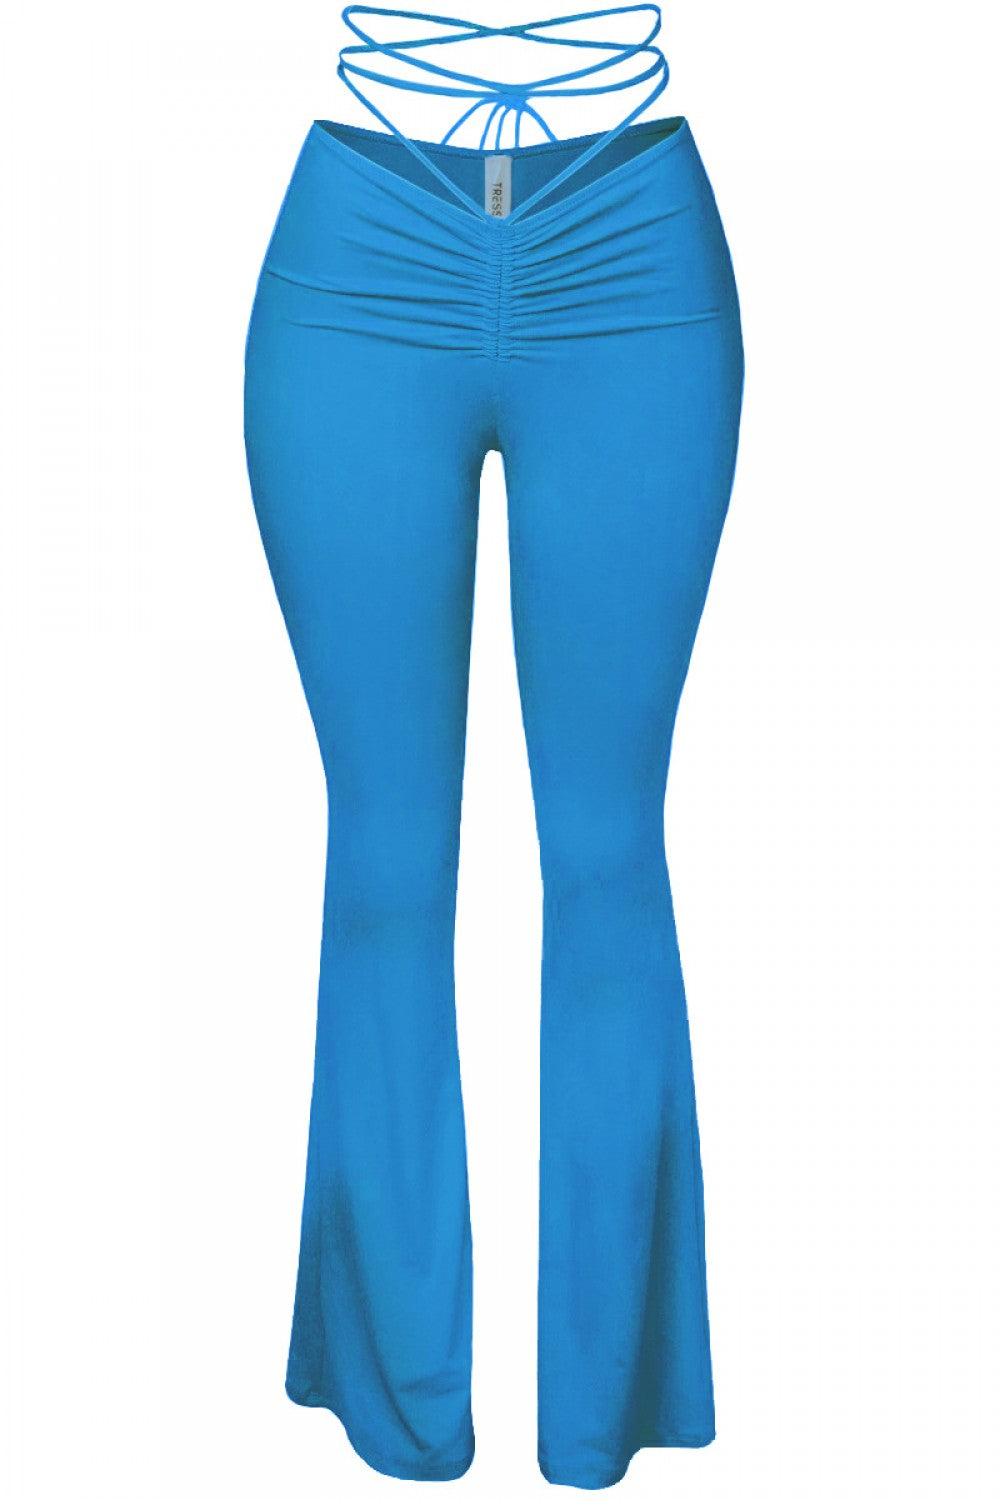 Ayanna Waist Tie Turquoise Blue Flare Pants - Style Baby OMG Fashion Boutique - Stylebabyomg - Buy - Aesthetic Baddie Outfits - Babyboo - OOTD - Shie 